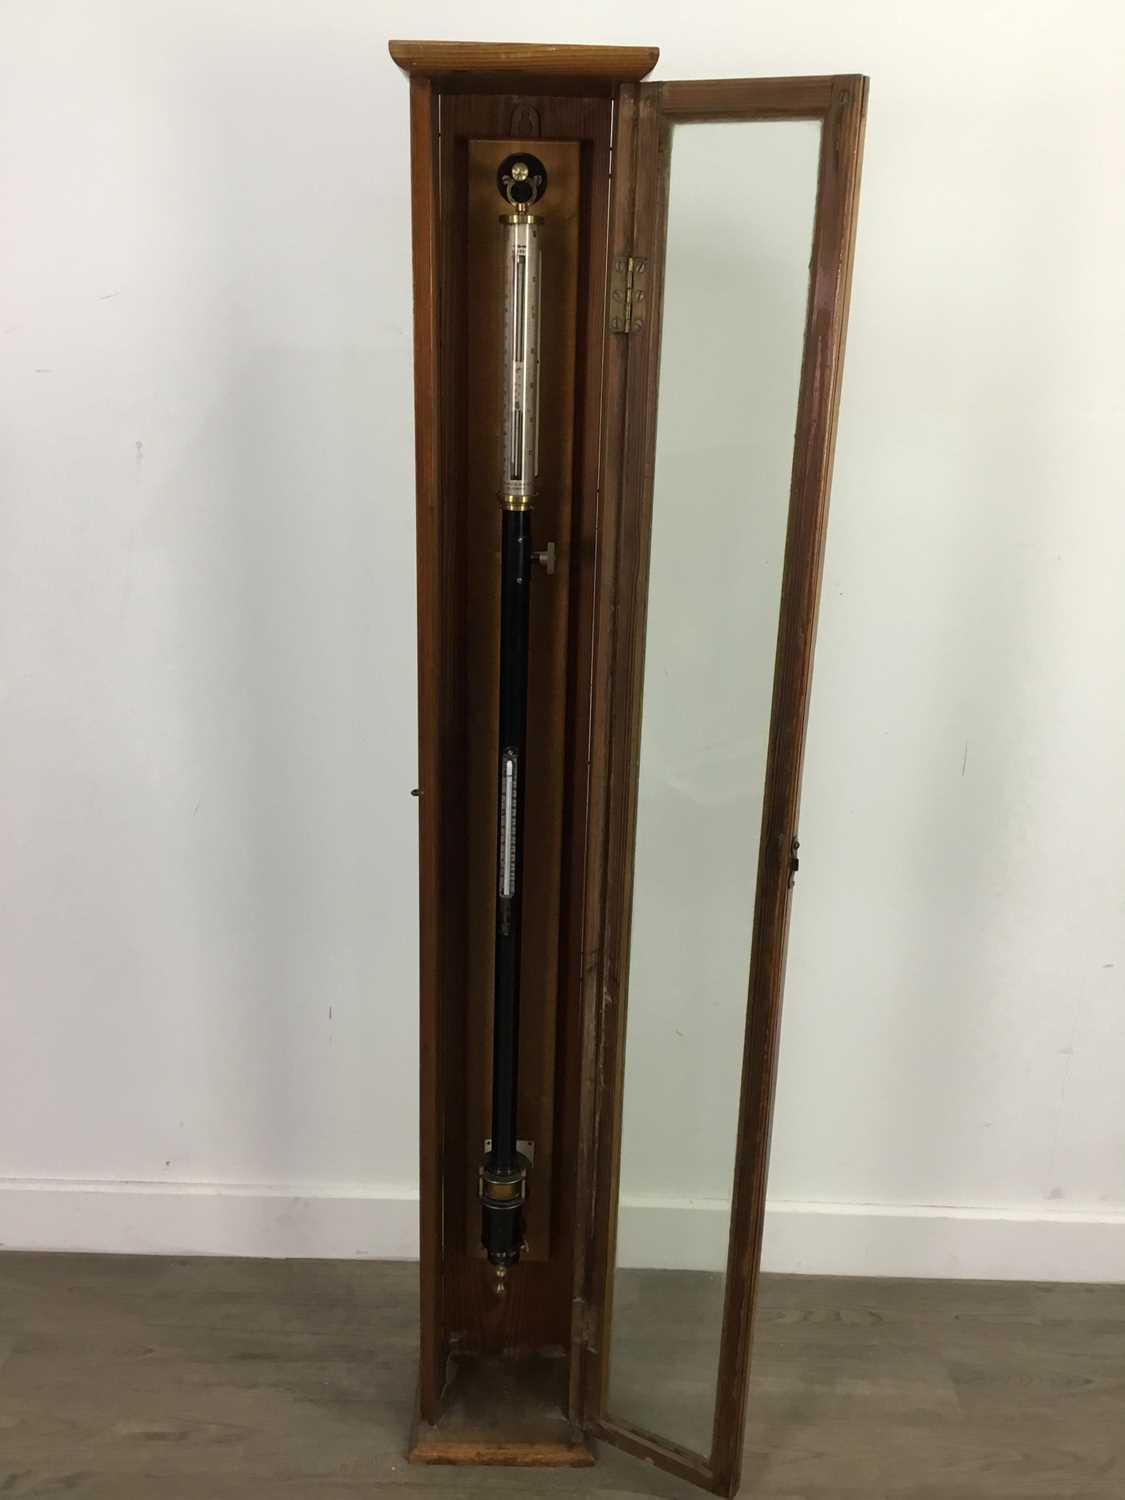 AN EARLY 20TH CENTURY FORTIN-TYPE BAROMETER BY W. B. NICHOLSON LTD. OF GLASGOW - Image 2 of 4